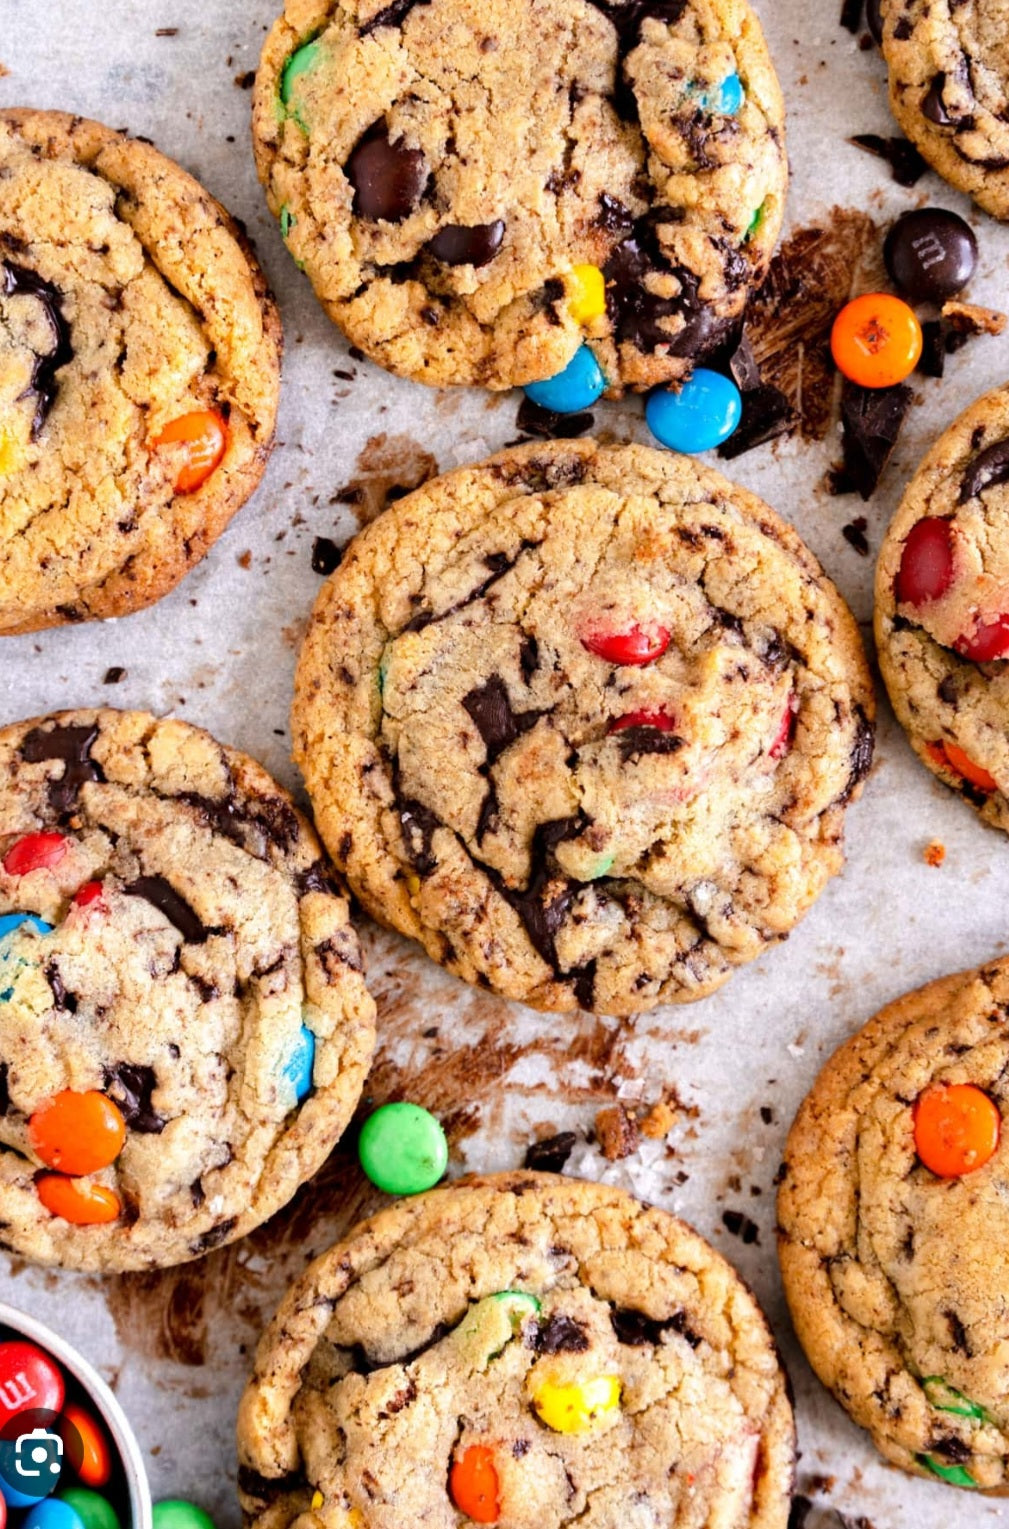 Chocolate Chip M&M Cookie Baking Class - Sunday, September 22nd. 2pm-4pm.